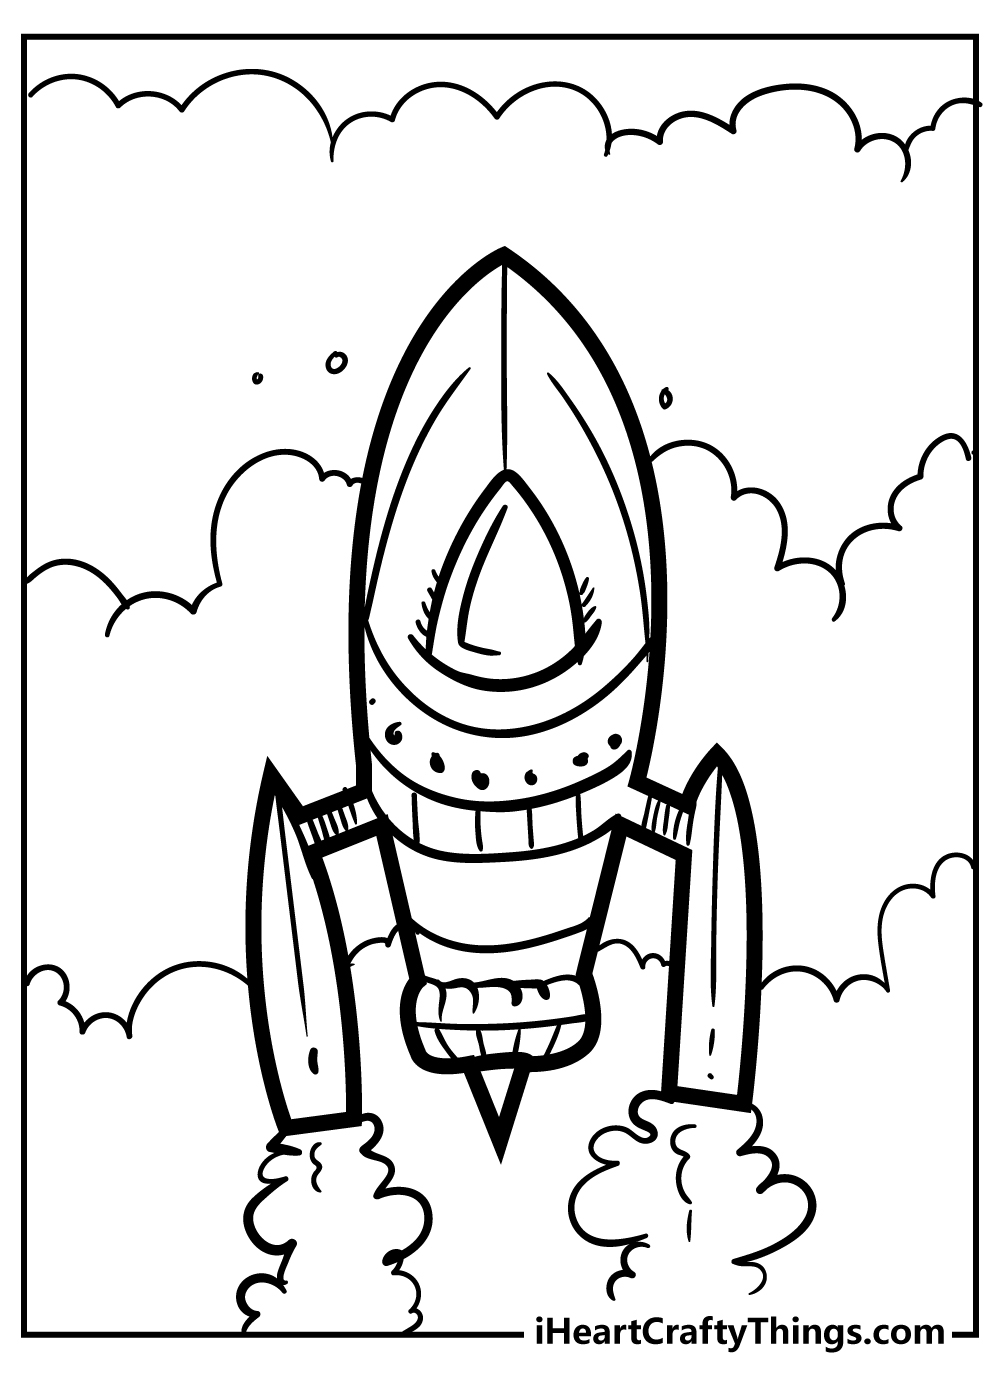 Rocket Coloring Pages for preschoolers free printable